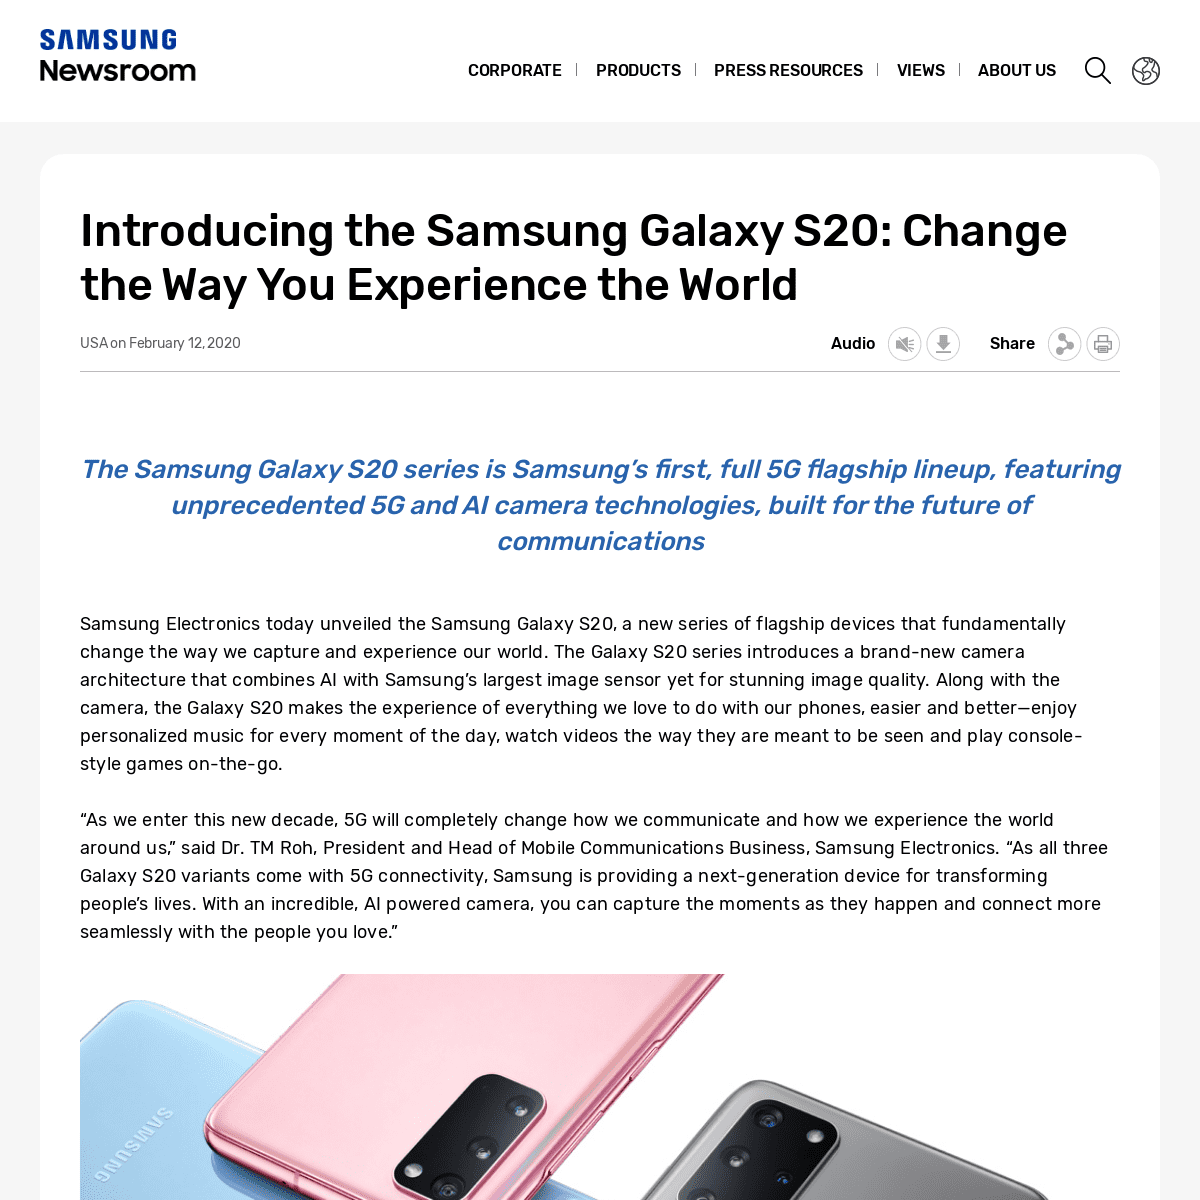 A complete backup of news.samsung.com/global/introducing-the-samsung-galaxy-s20-change-the-way-you-experience-the-world